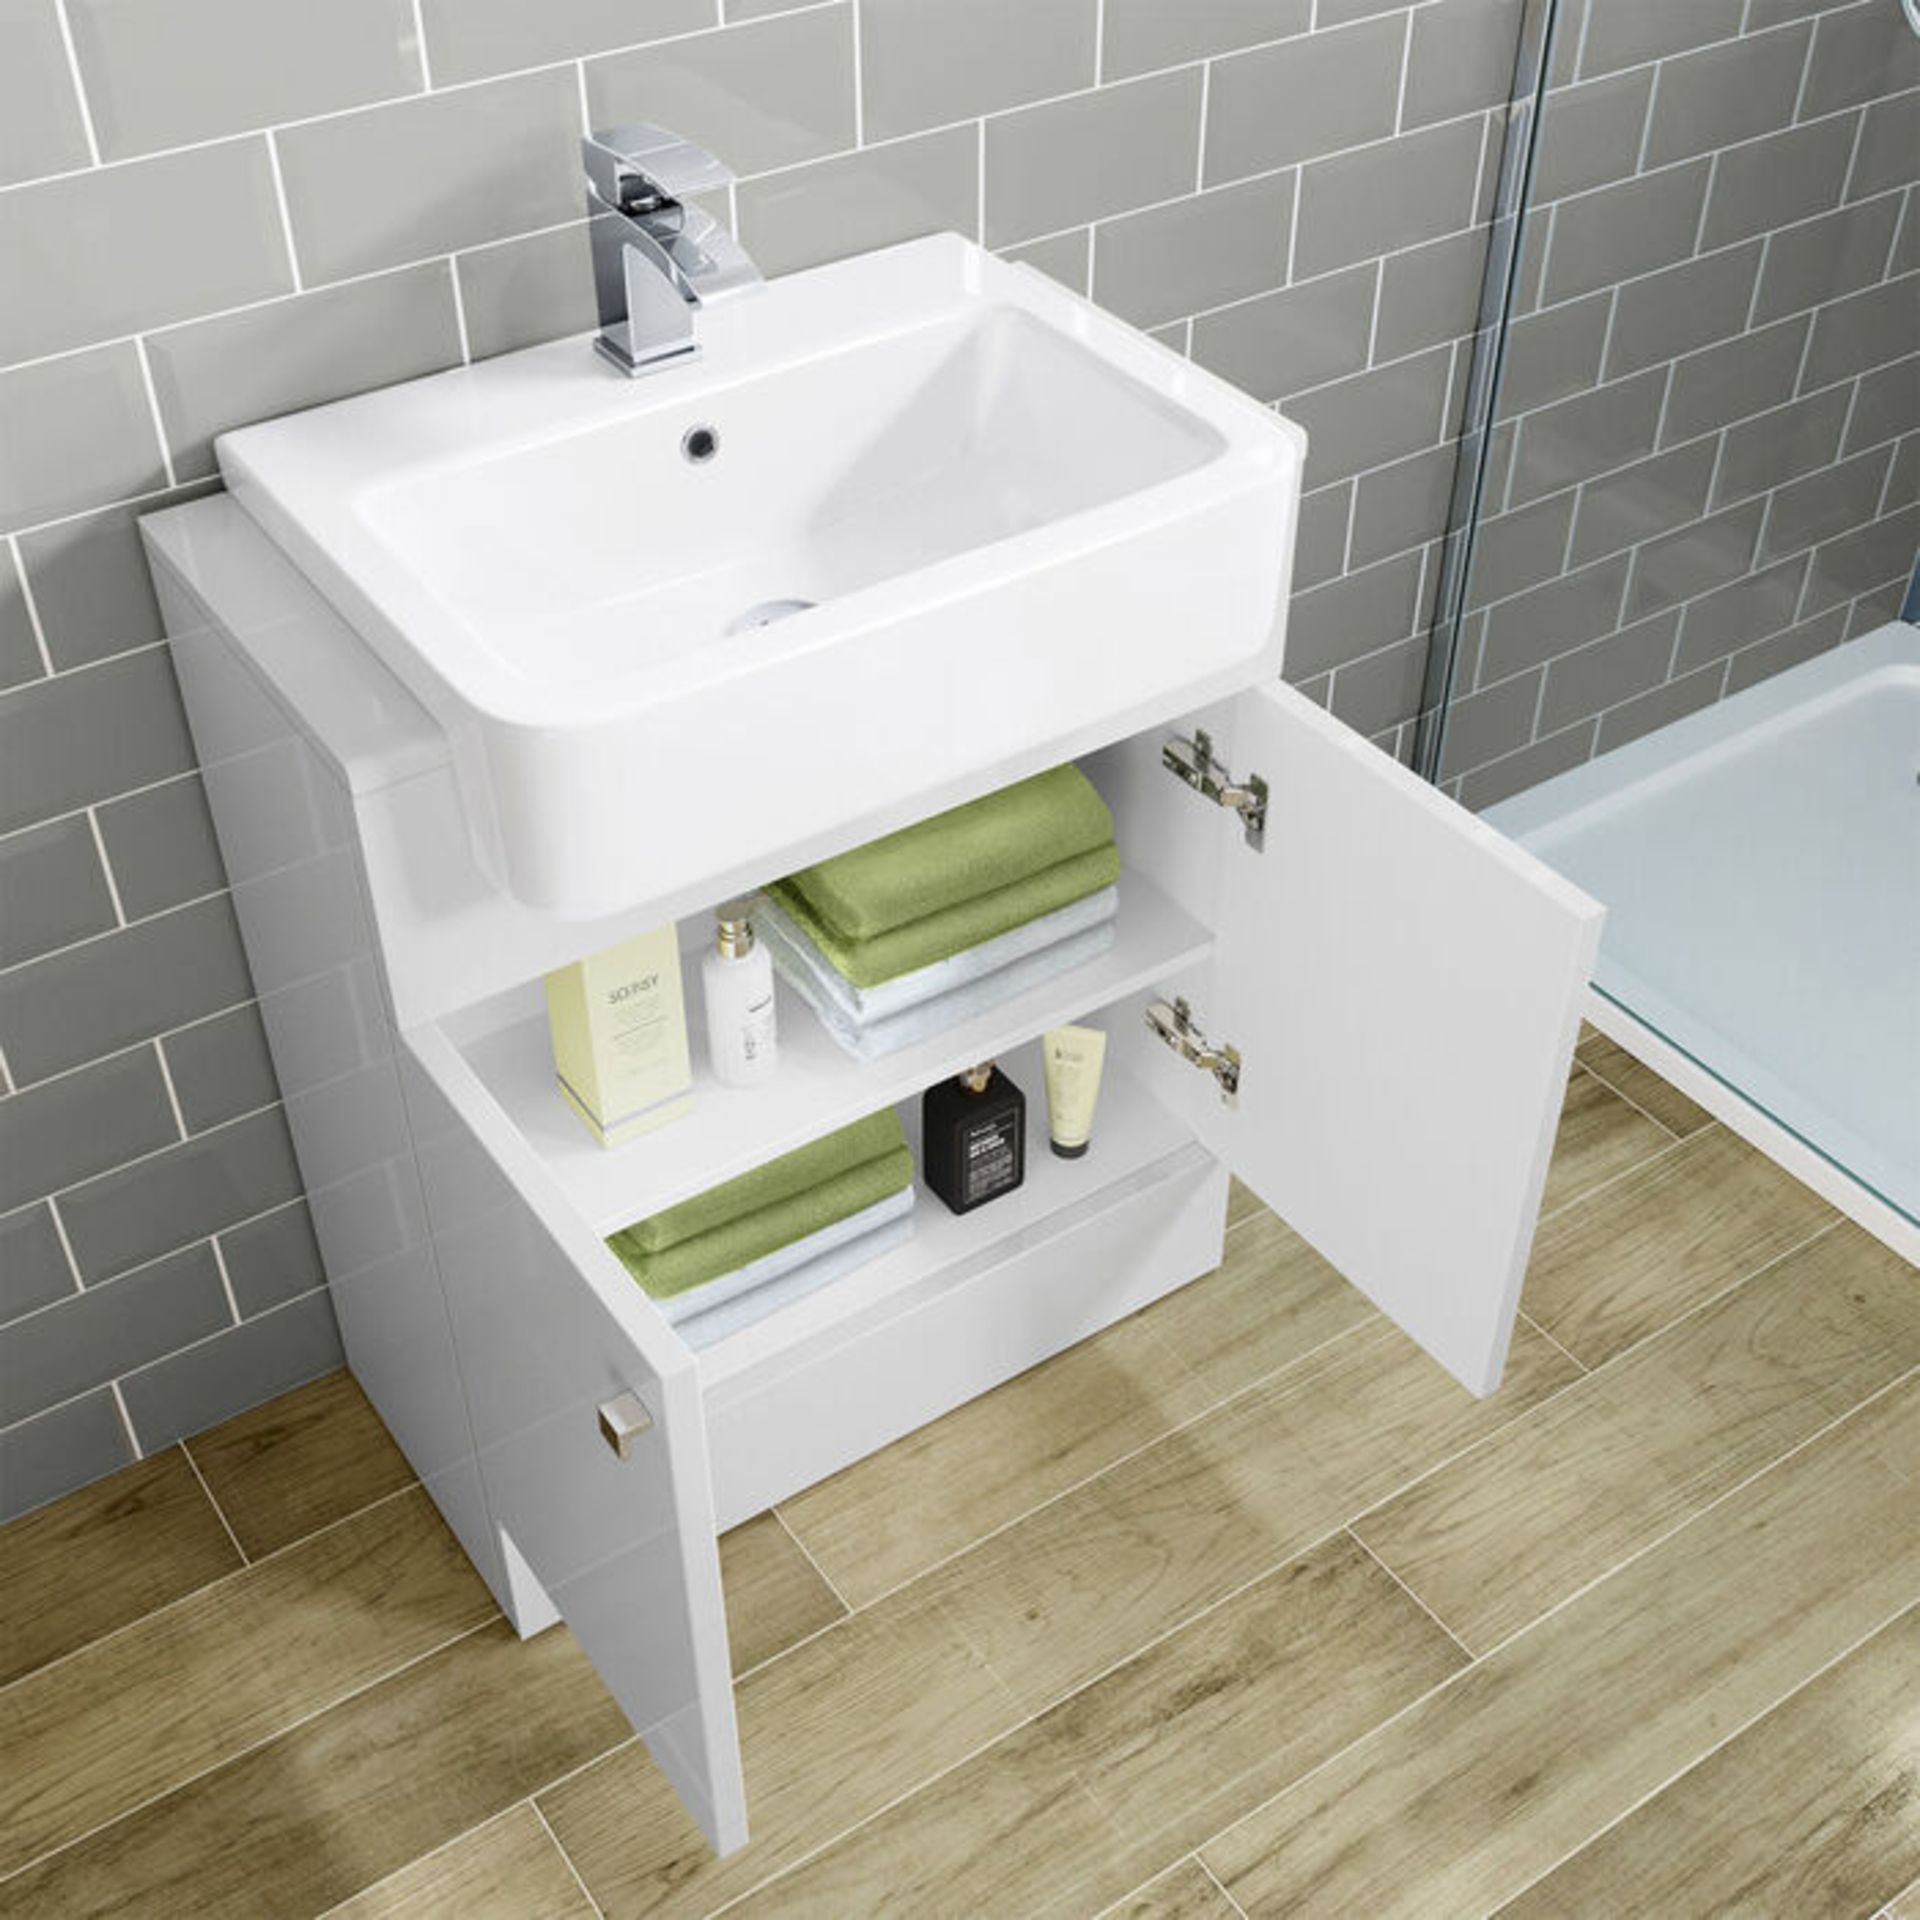 BRAND NEW BOXED 660mm Harper Gloss White Sink Vanity Unit - Floor Standing. RRP £749.99.Comes... - Image 2 of 4